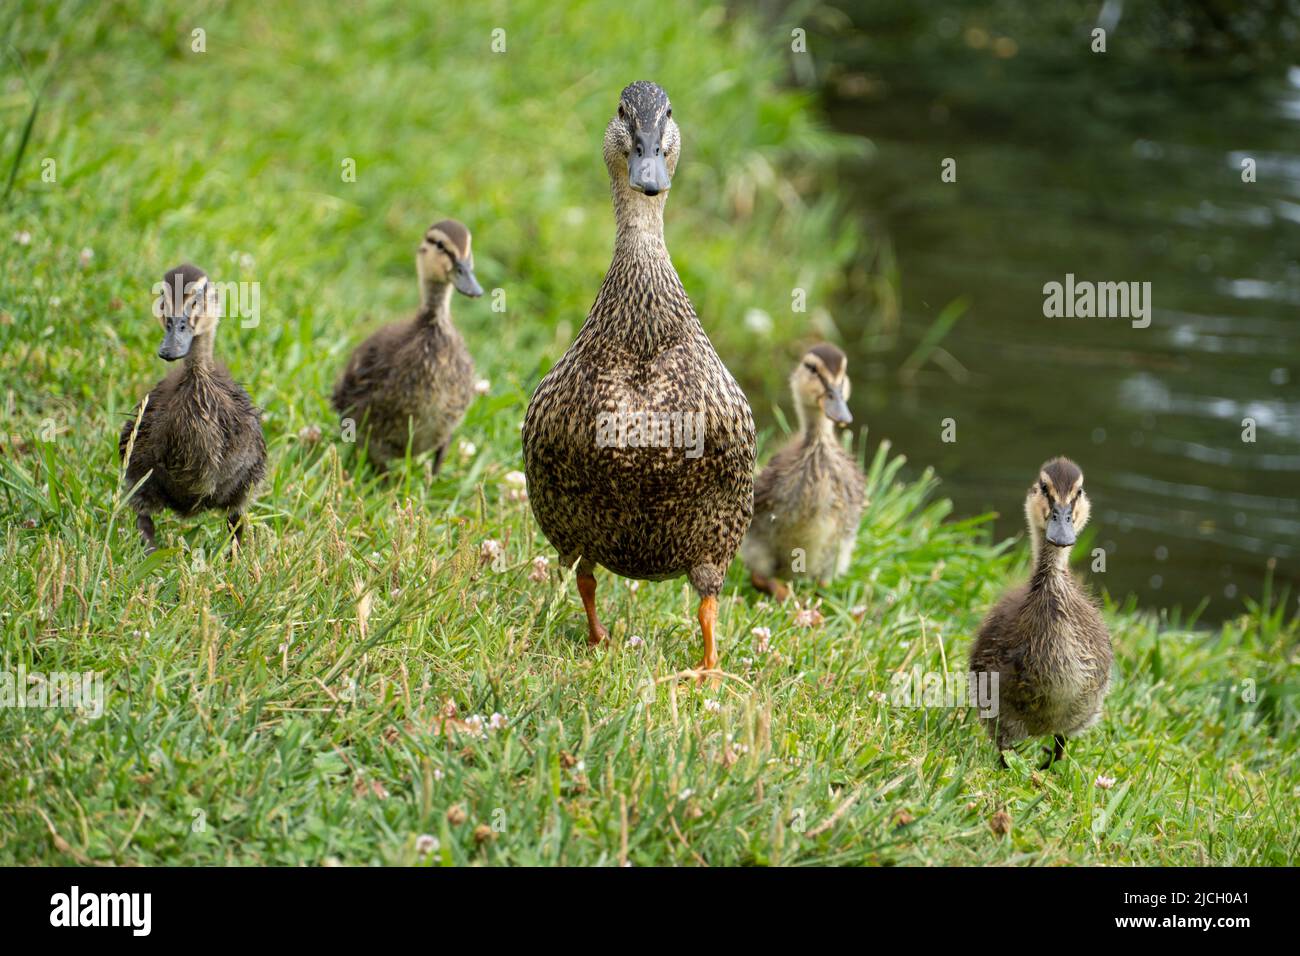 Duck with four ducklings walking on grass next to water Stock Photo